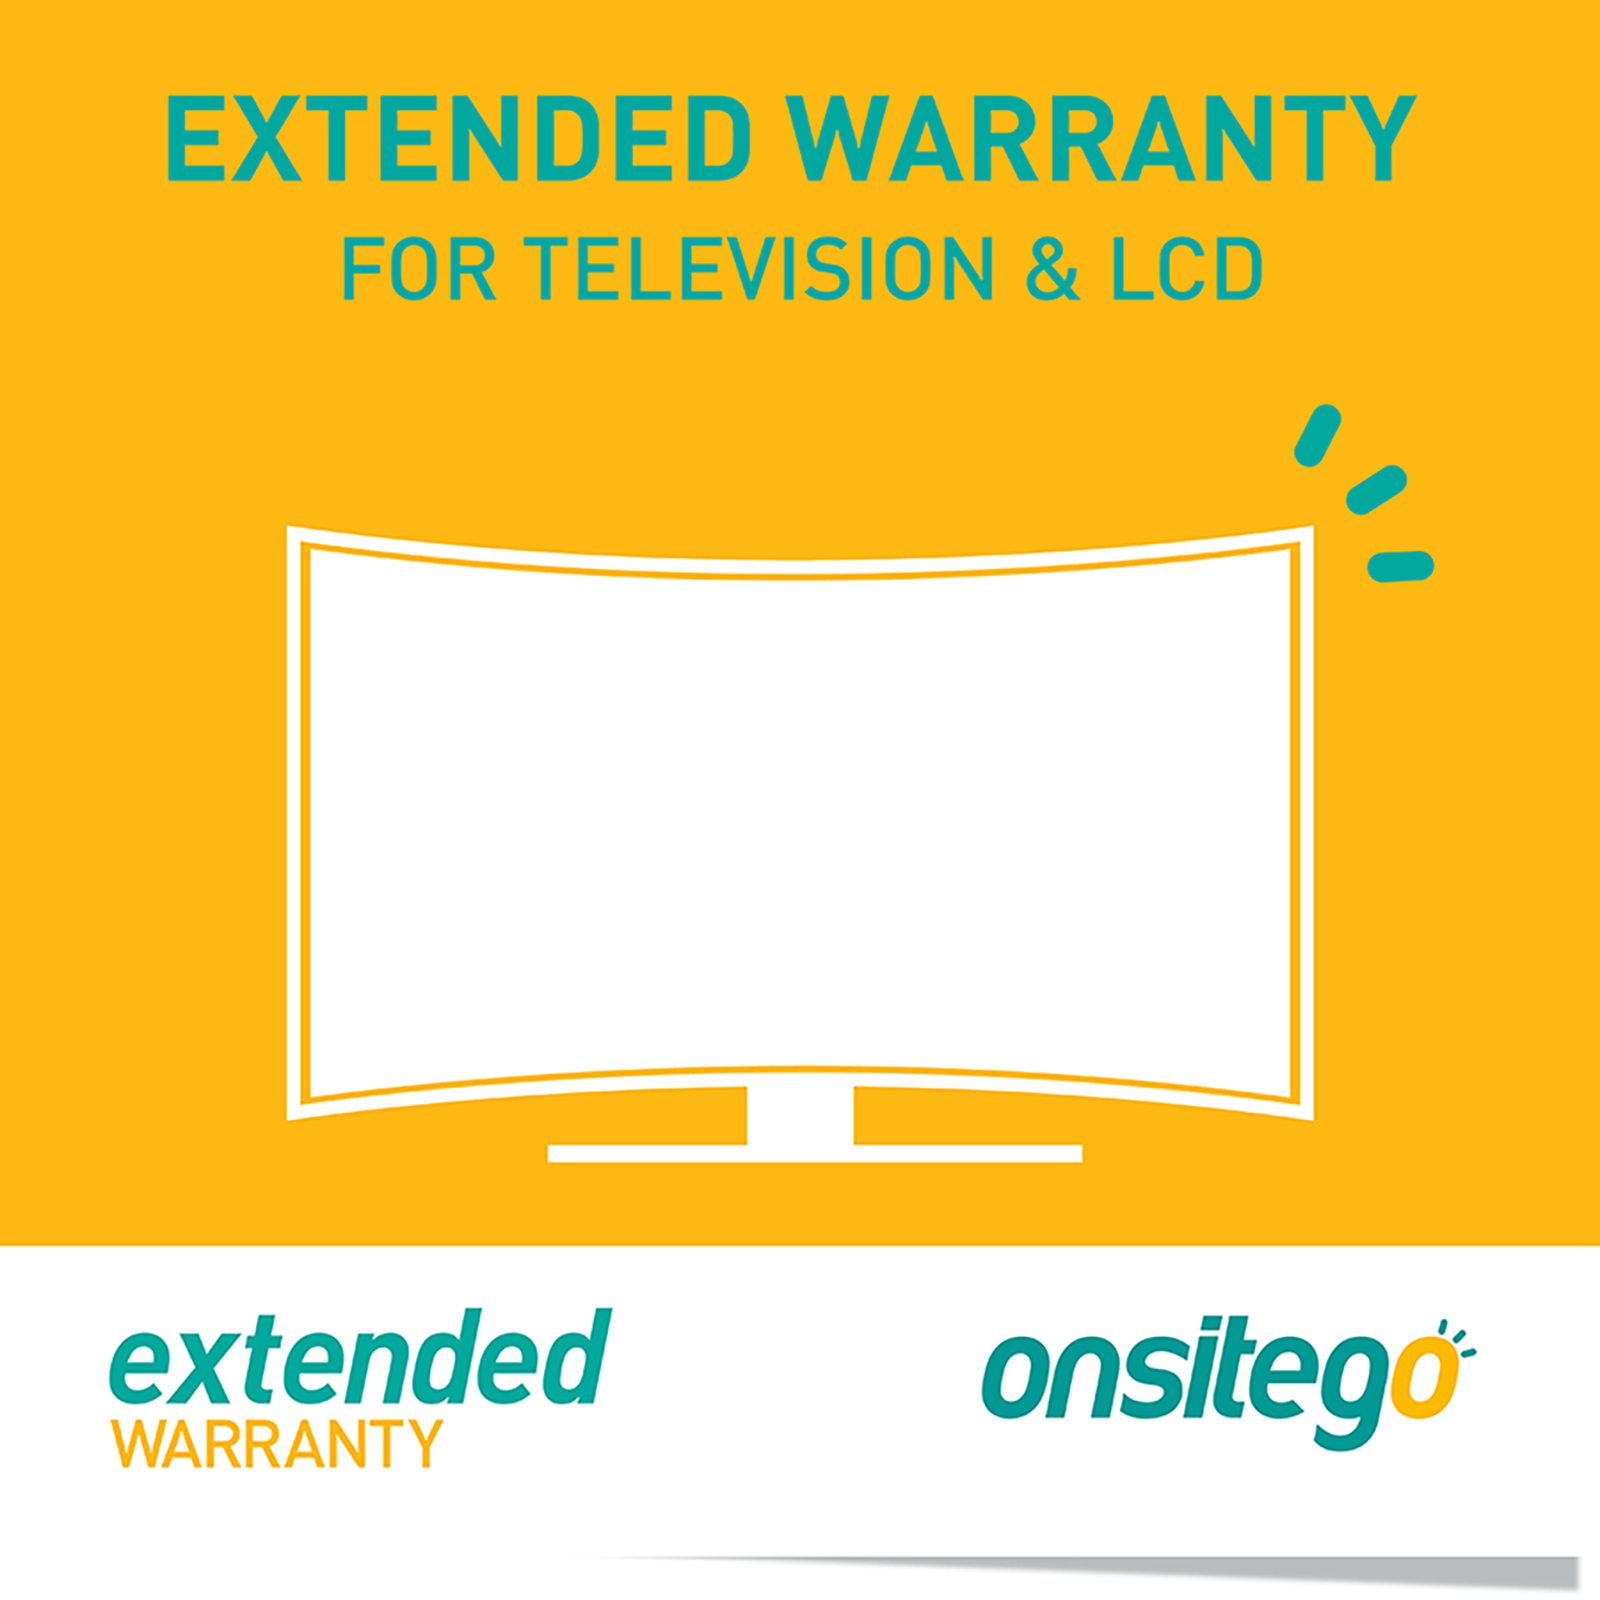 Onsitego 2 Year Extended Warranty for Television (Rs.12,00,000 - Rs.15,00,000)_1